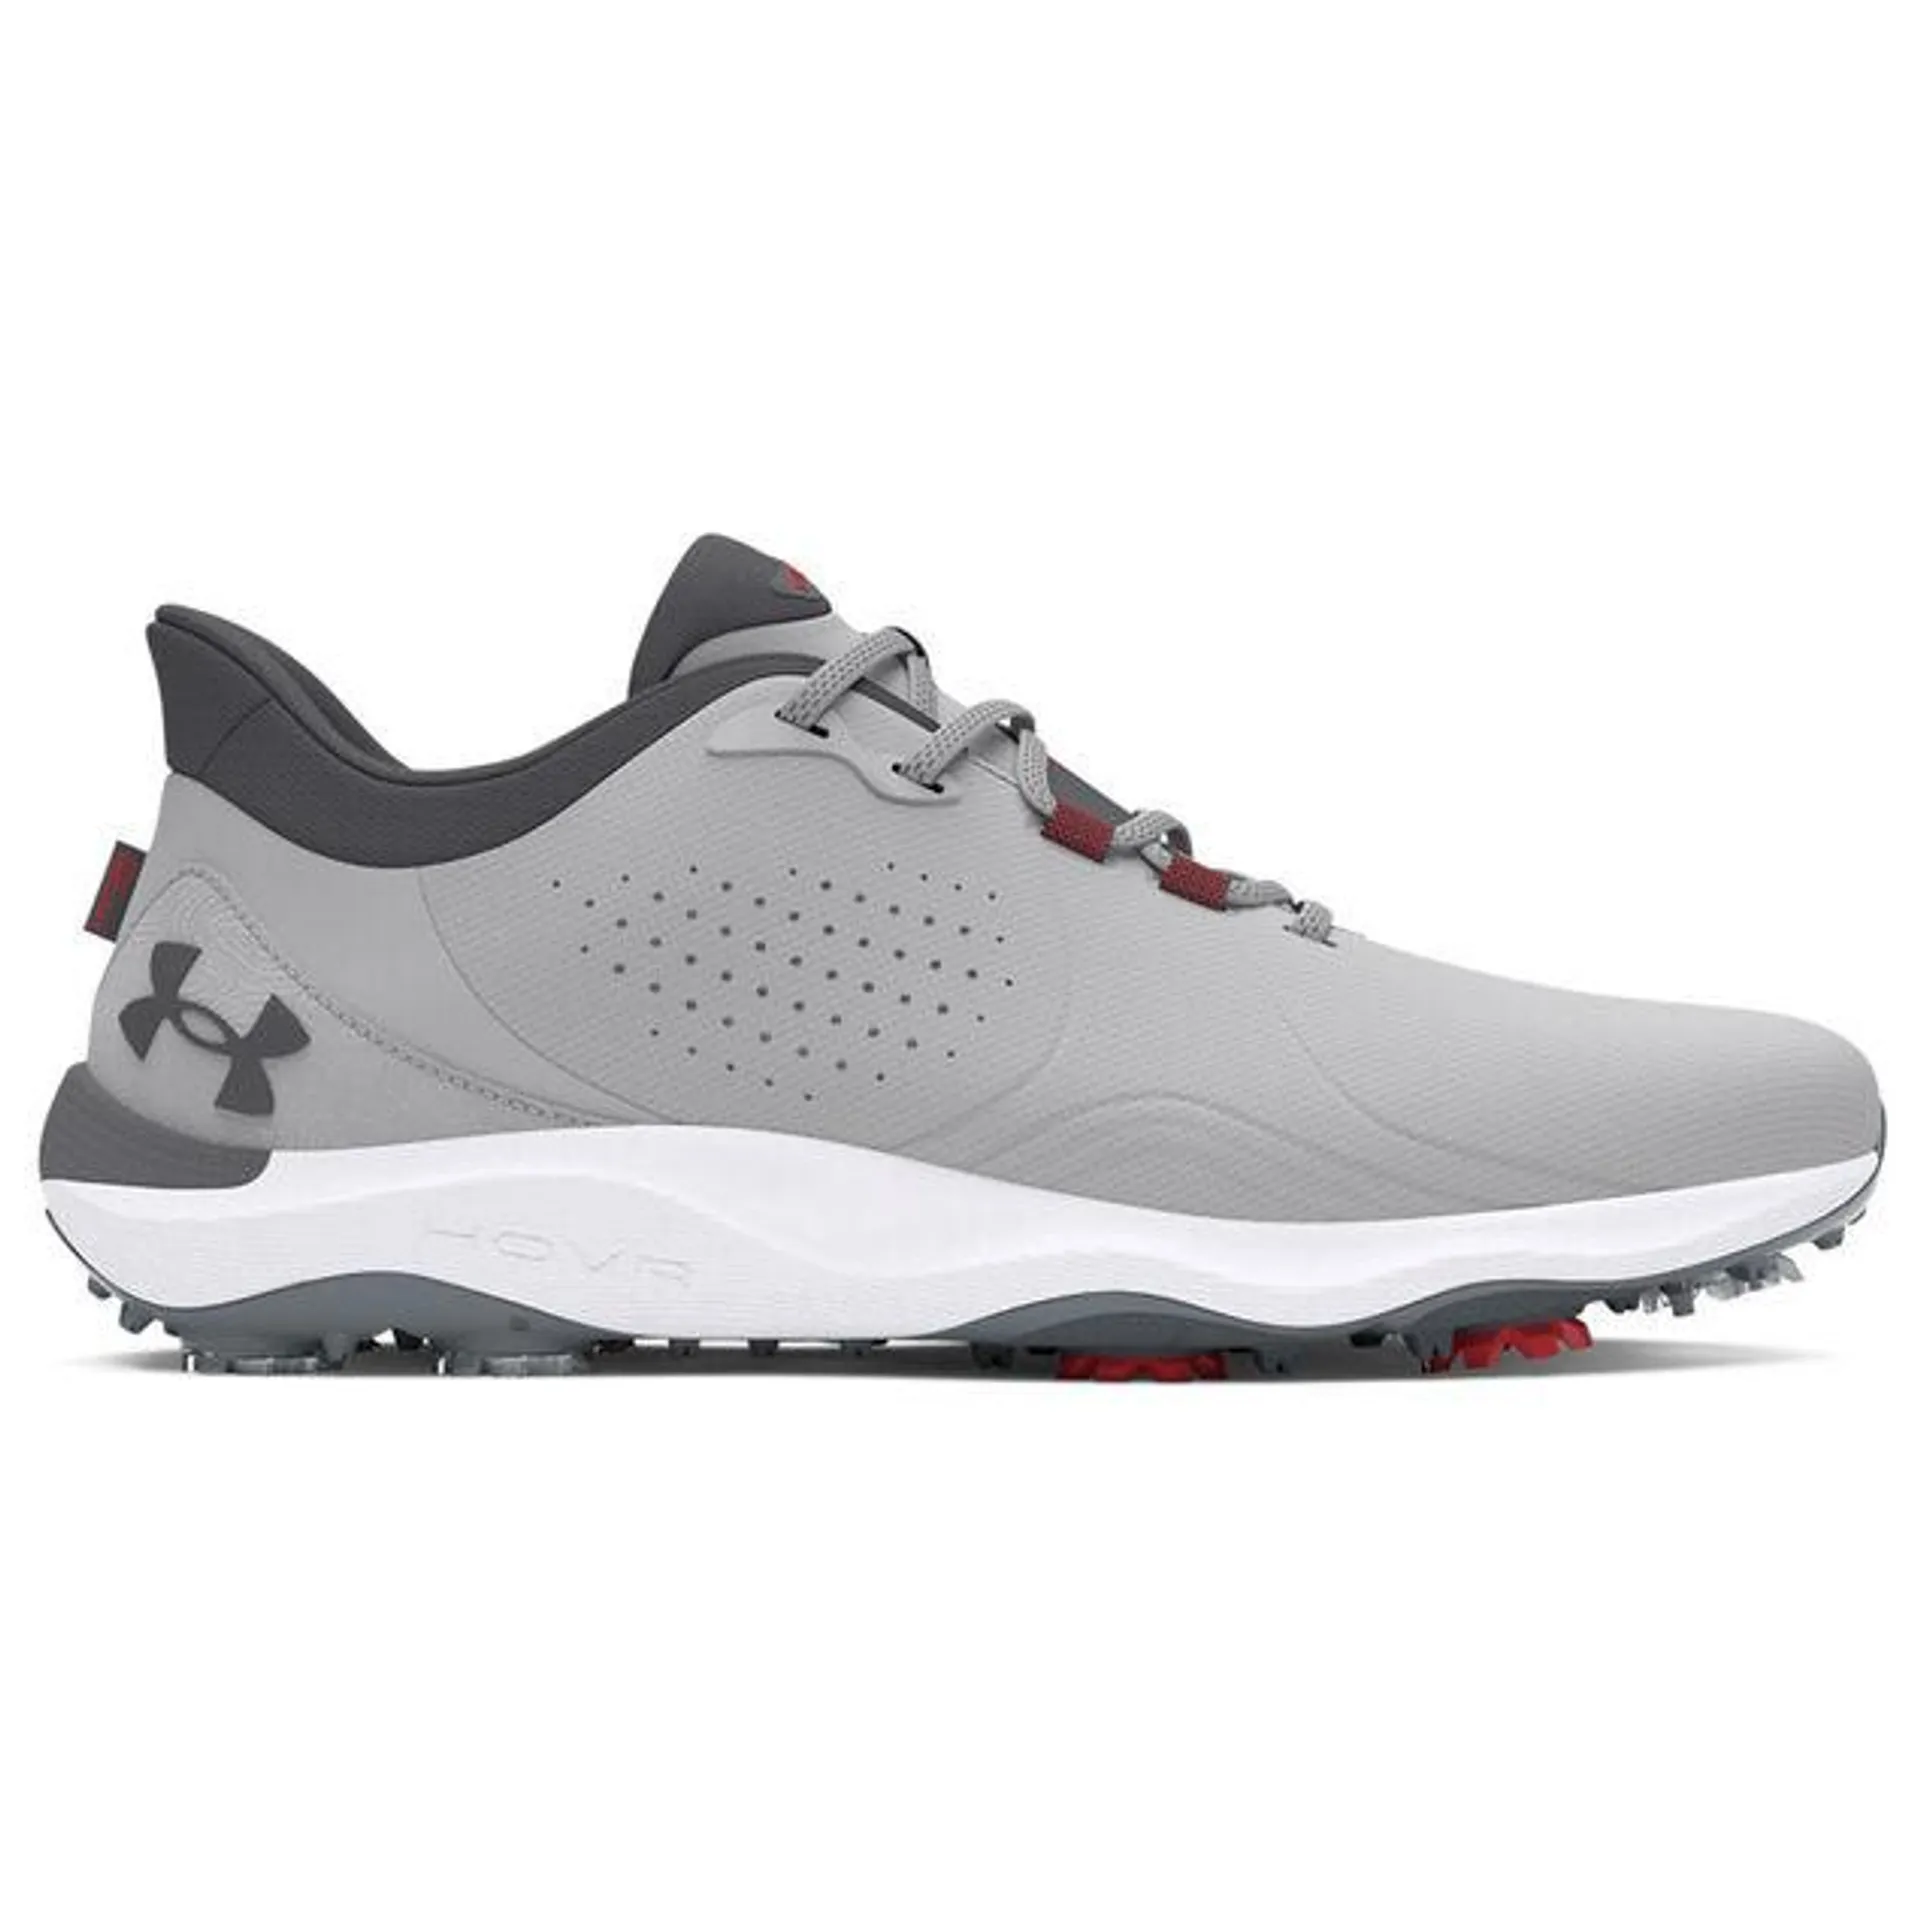 Under Armour Men's Drive Pro Waterproof Spiked Golf Shoes